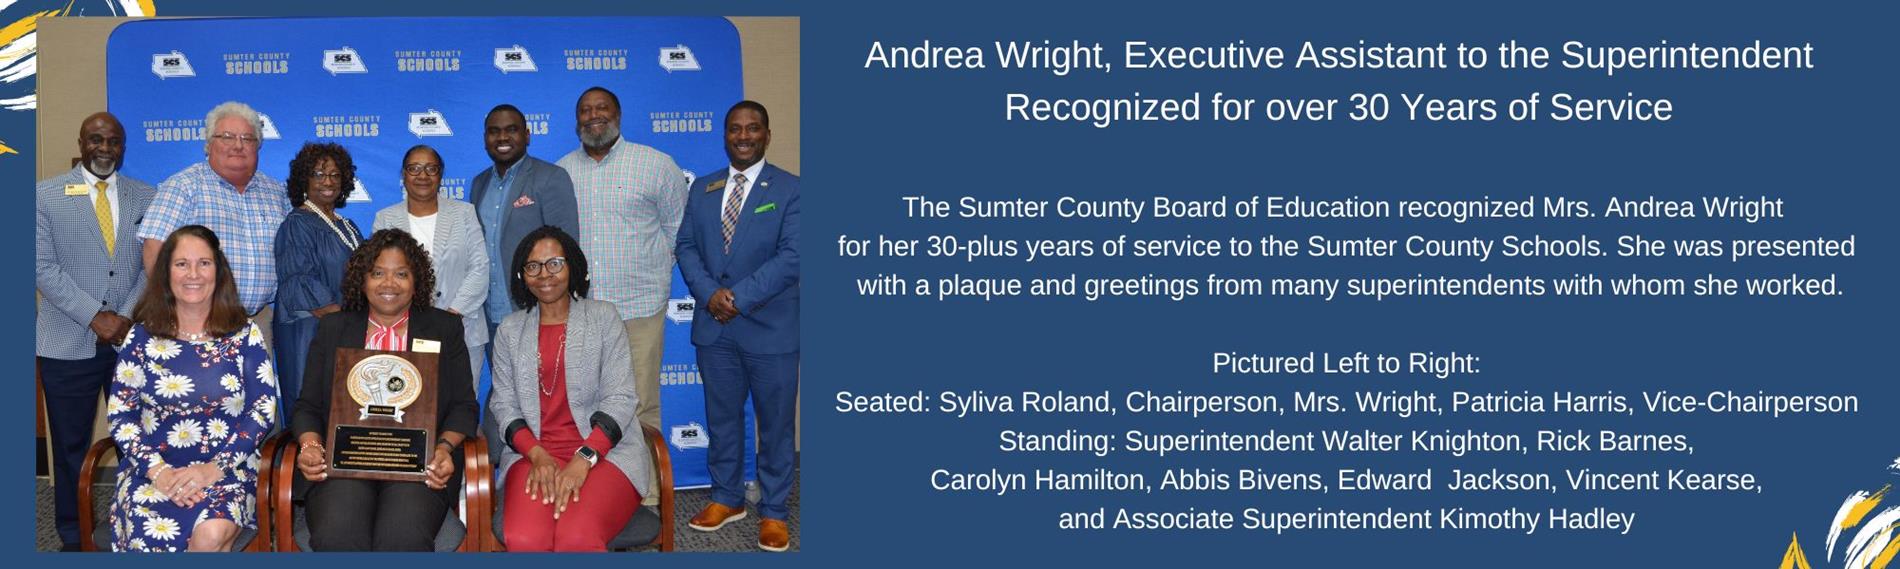 Andrea Wright Recognized for over 30 Years of Service